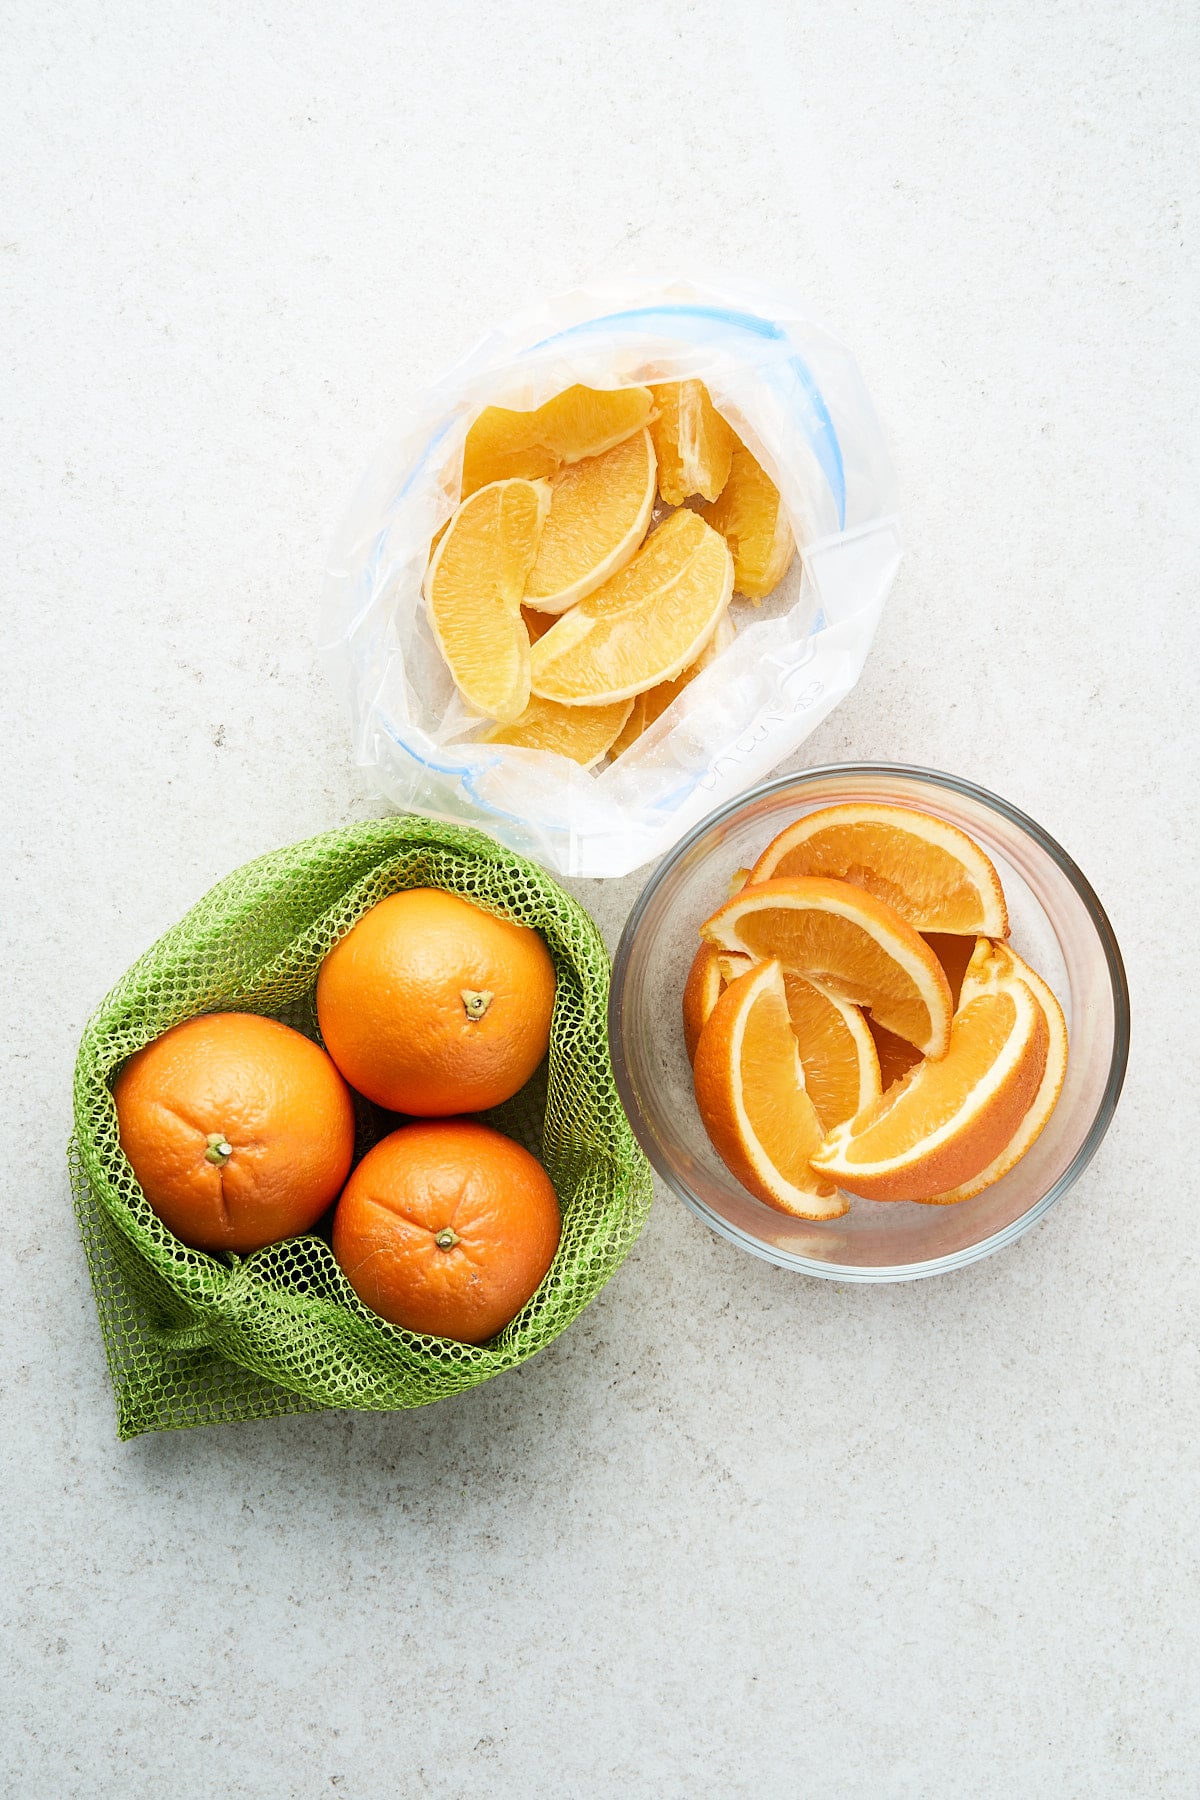 Oranges in a mesh bag, glass container, and plastic bag.